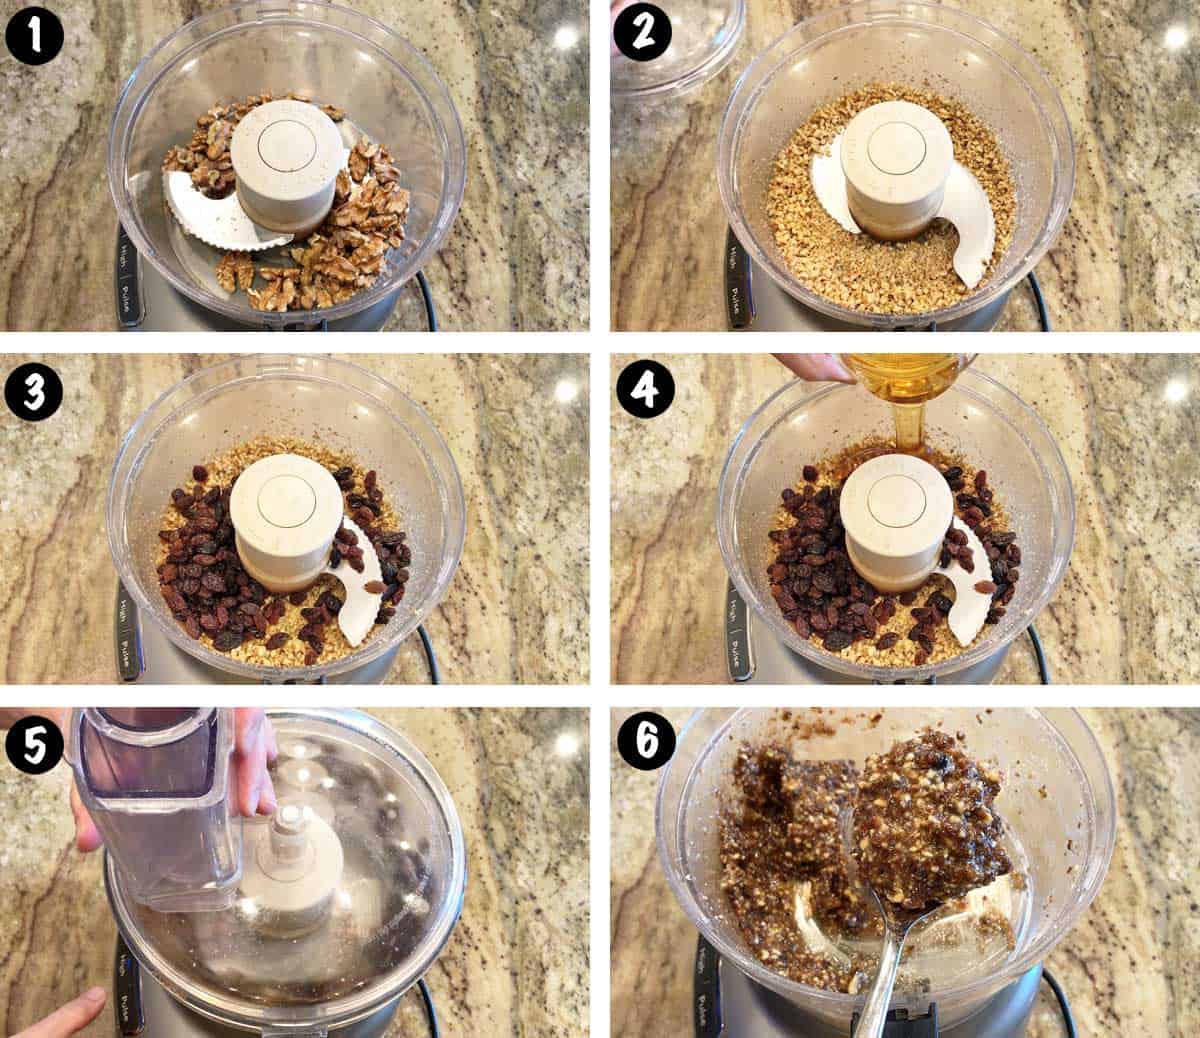 A six-photo collage showing the steps for making charoset.